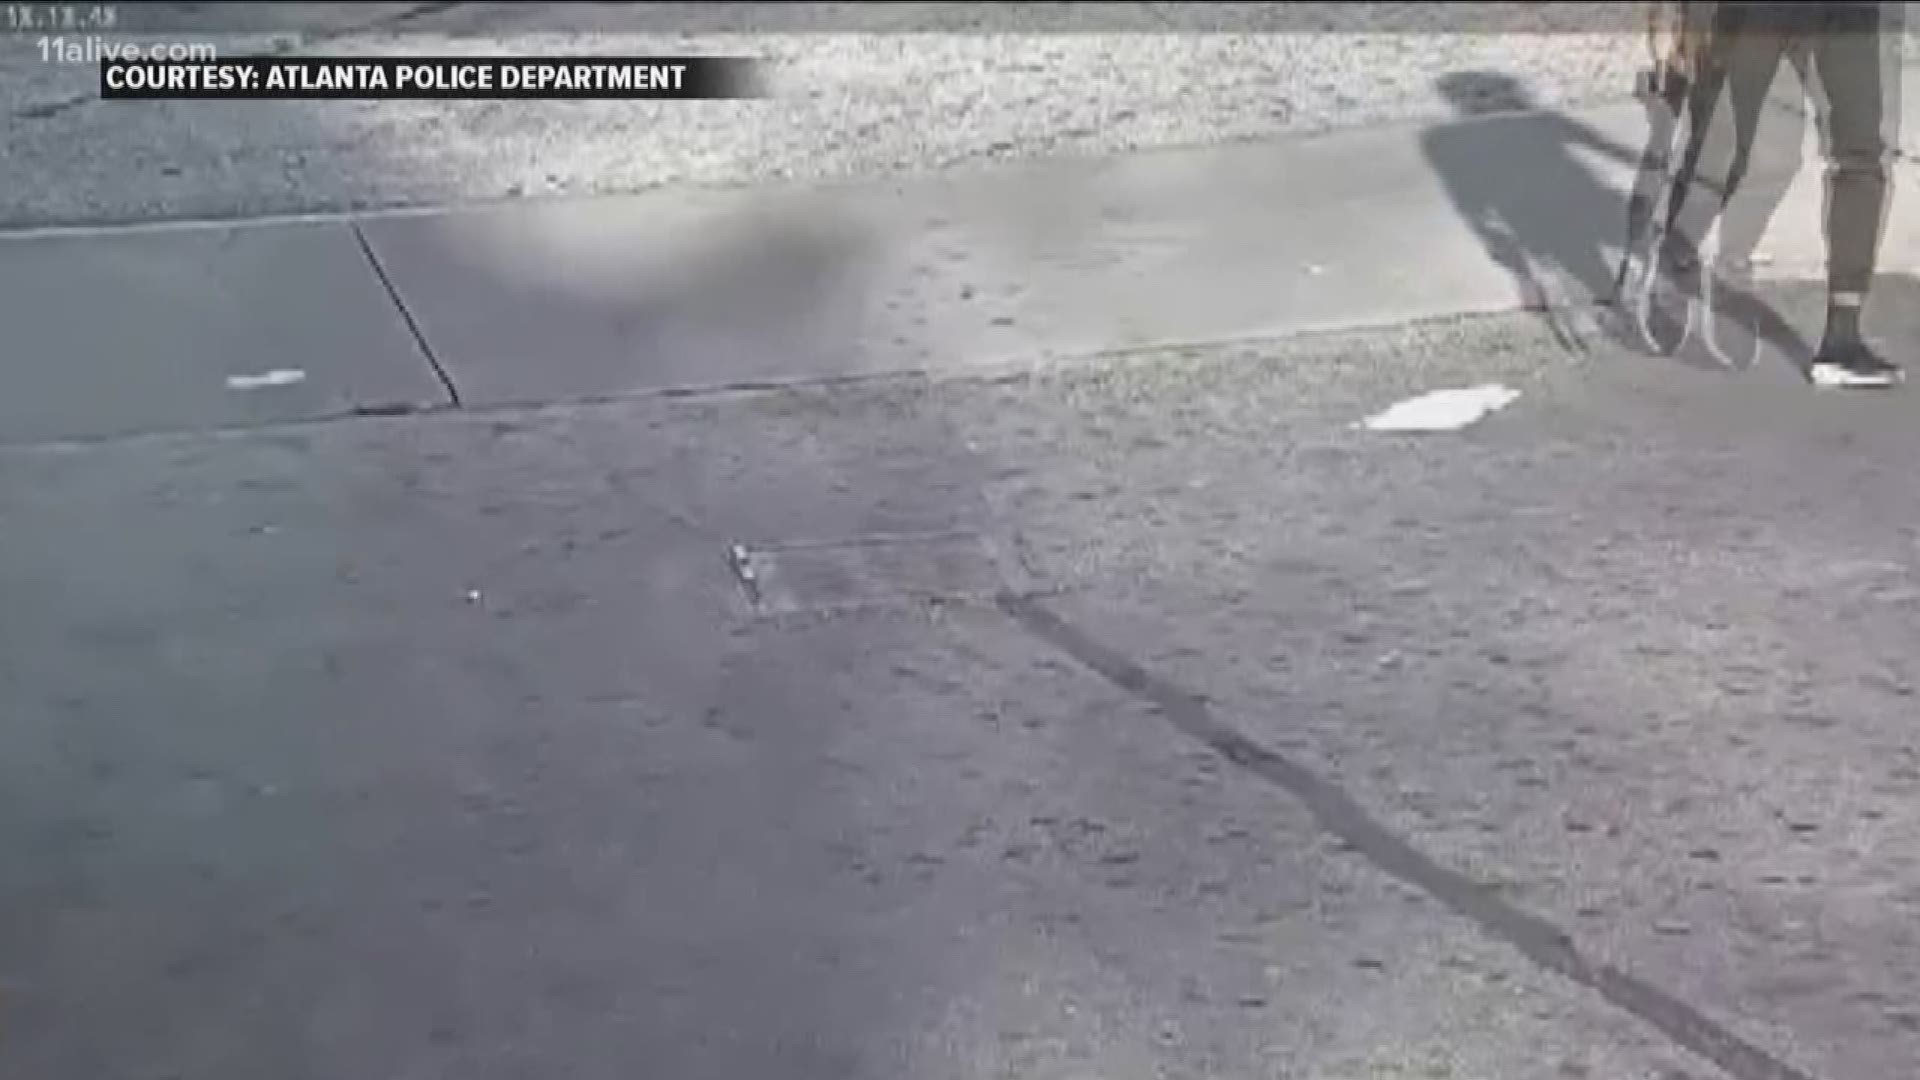 Here is a video that shows the suspect firing the weapon.